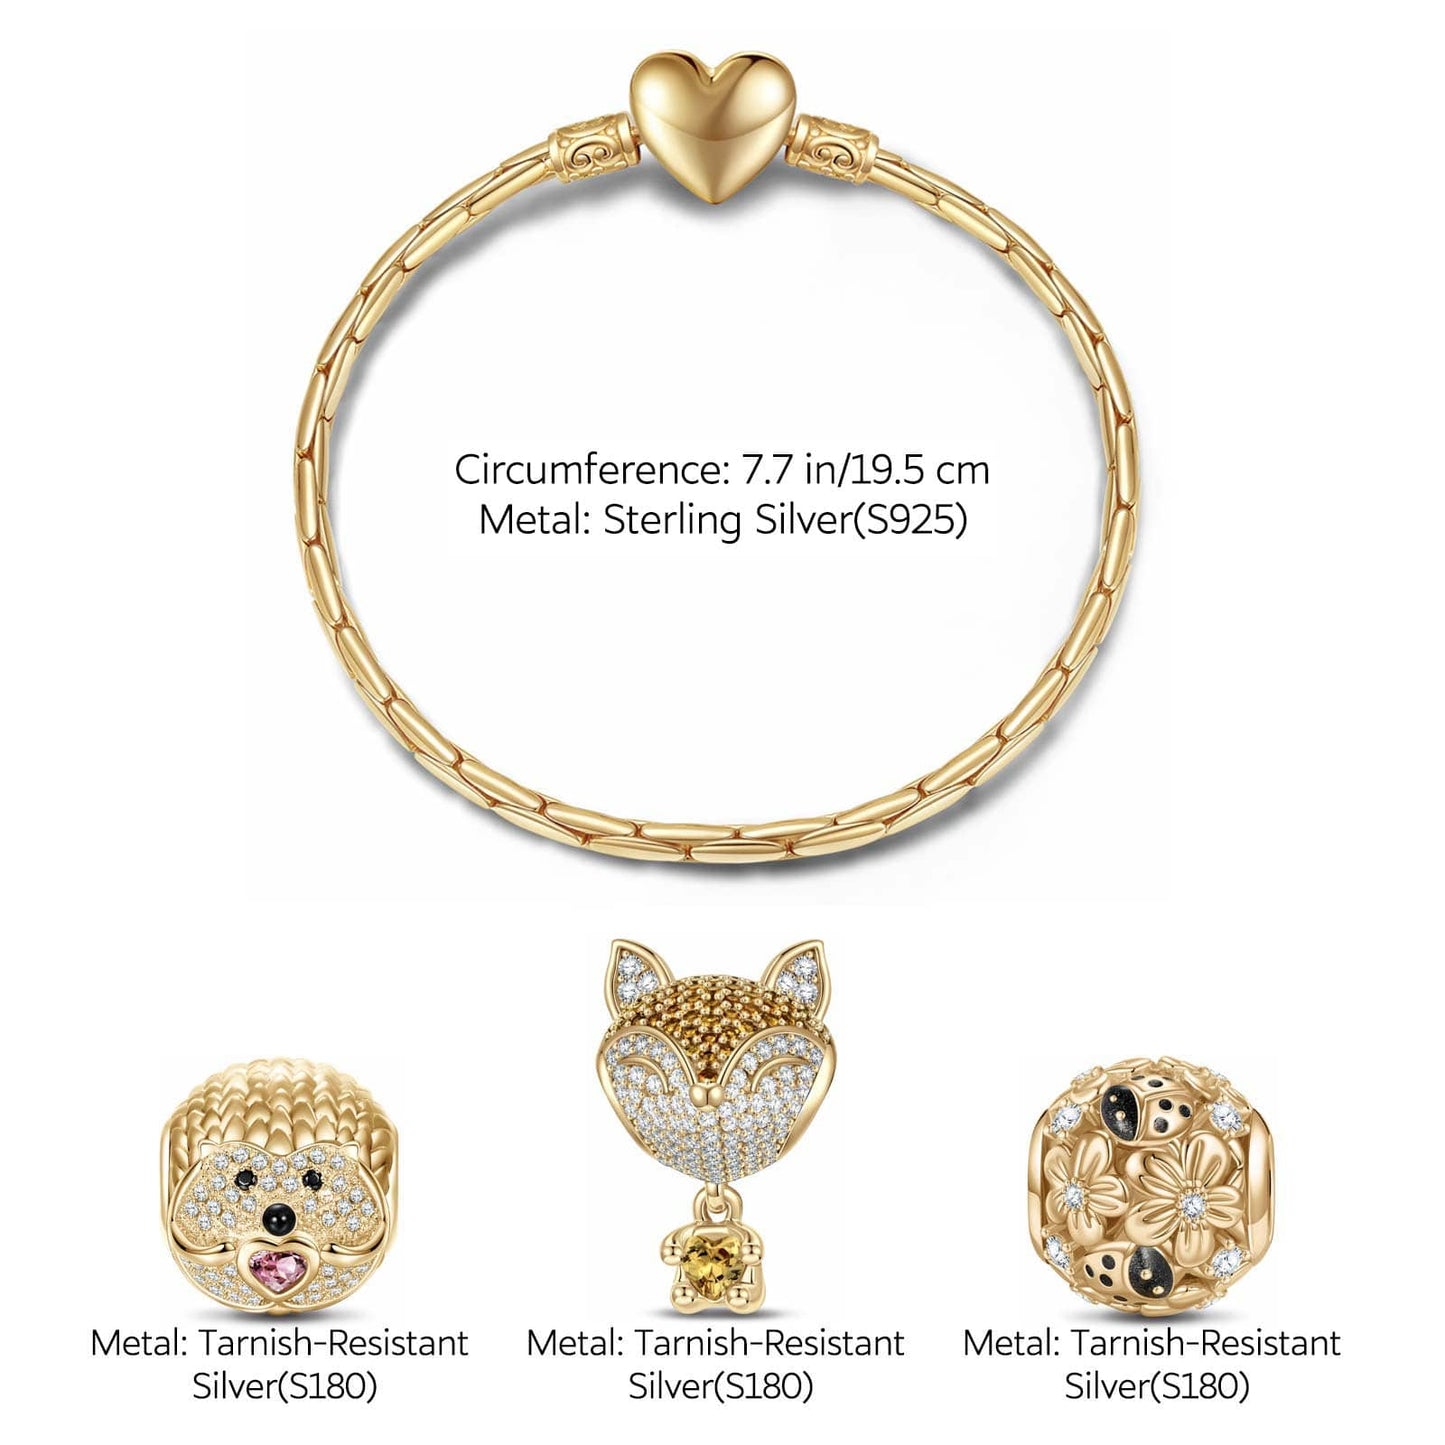 Sterling Silver Little Fox and Hedgehog Animals Charms Bracelet Set In 14K Gold Plated - Heartful Hugs Collection